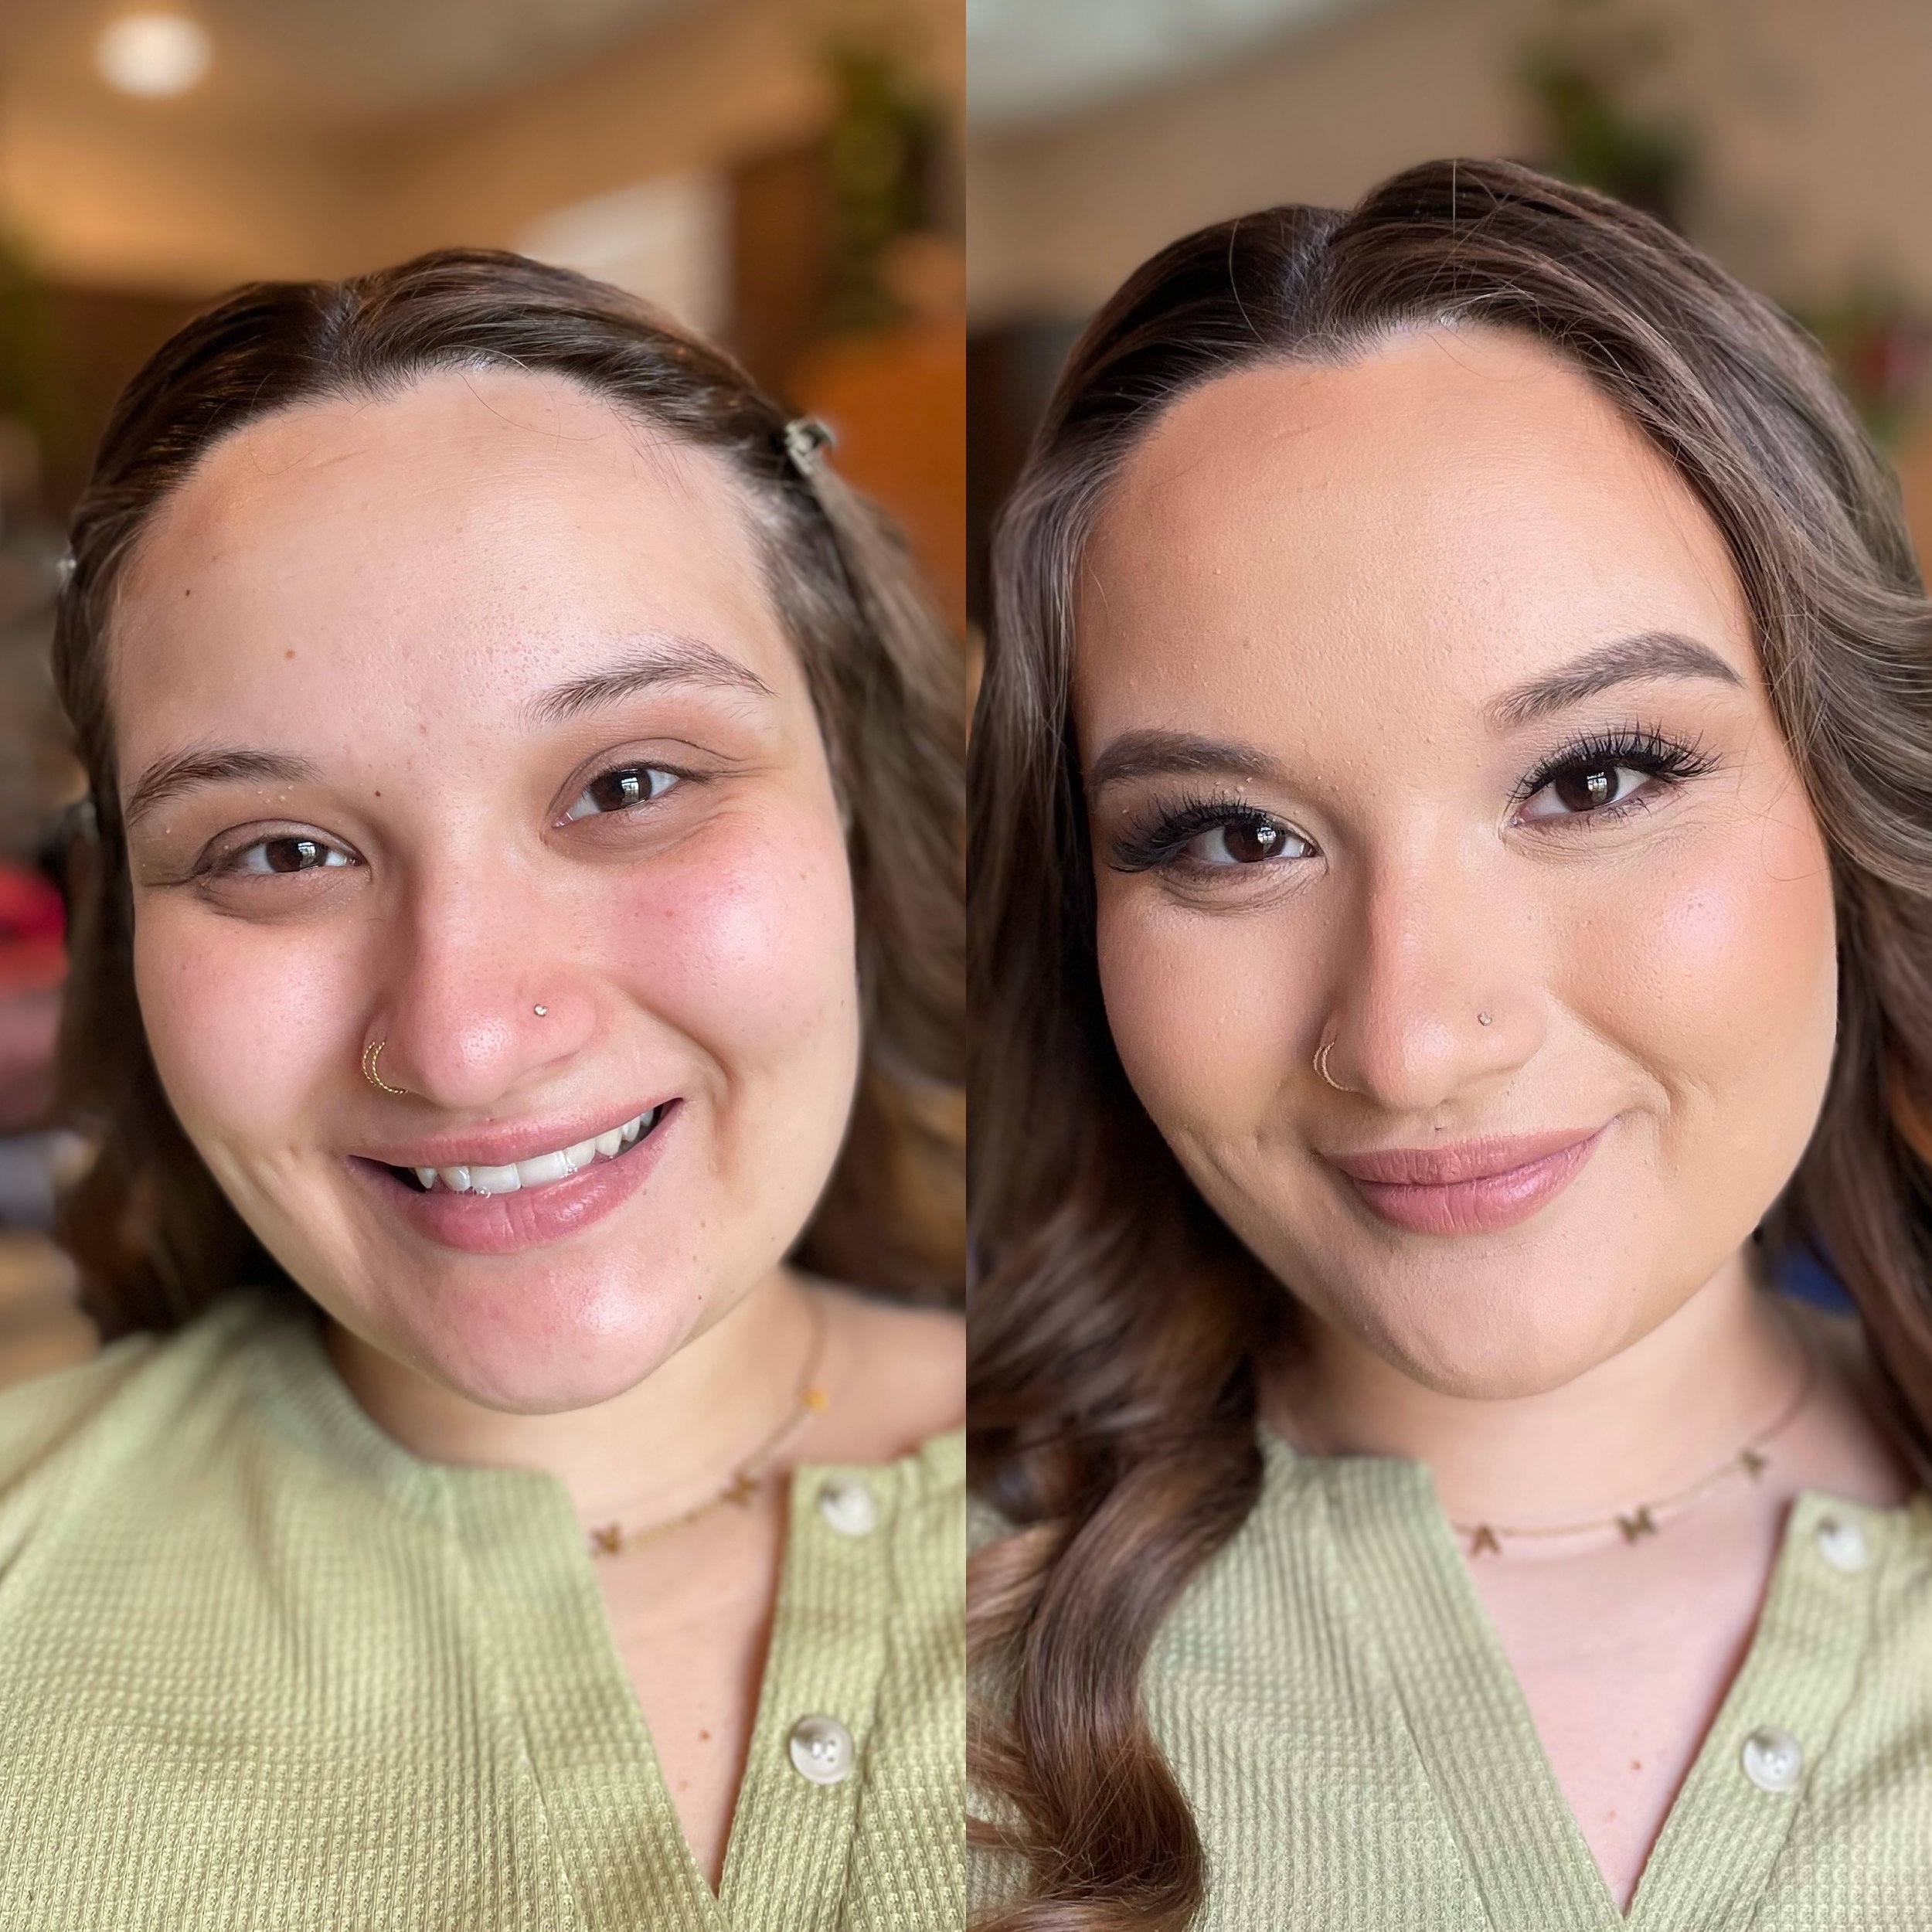 Maternity photo glam before &amp; after on this beautiful mama to be🤎✨ 

Cocktailed two of my favs ➡️ @charlottetilbury Airbrush Flawless Foundation &amp; @diorbeauty Face &amp; Body for the most perfect buttery complexion. 

+ the new @rarebeauty S